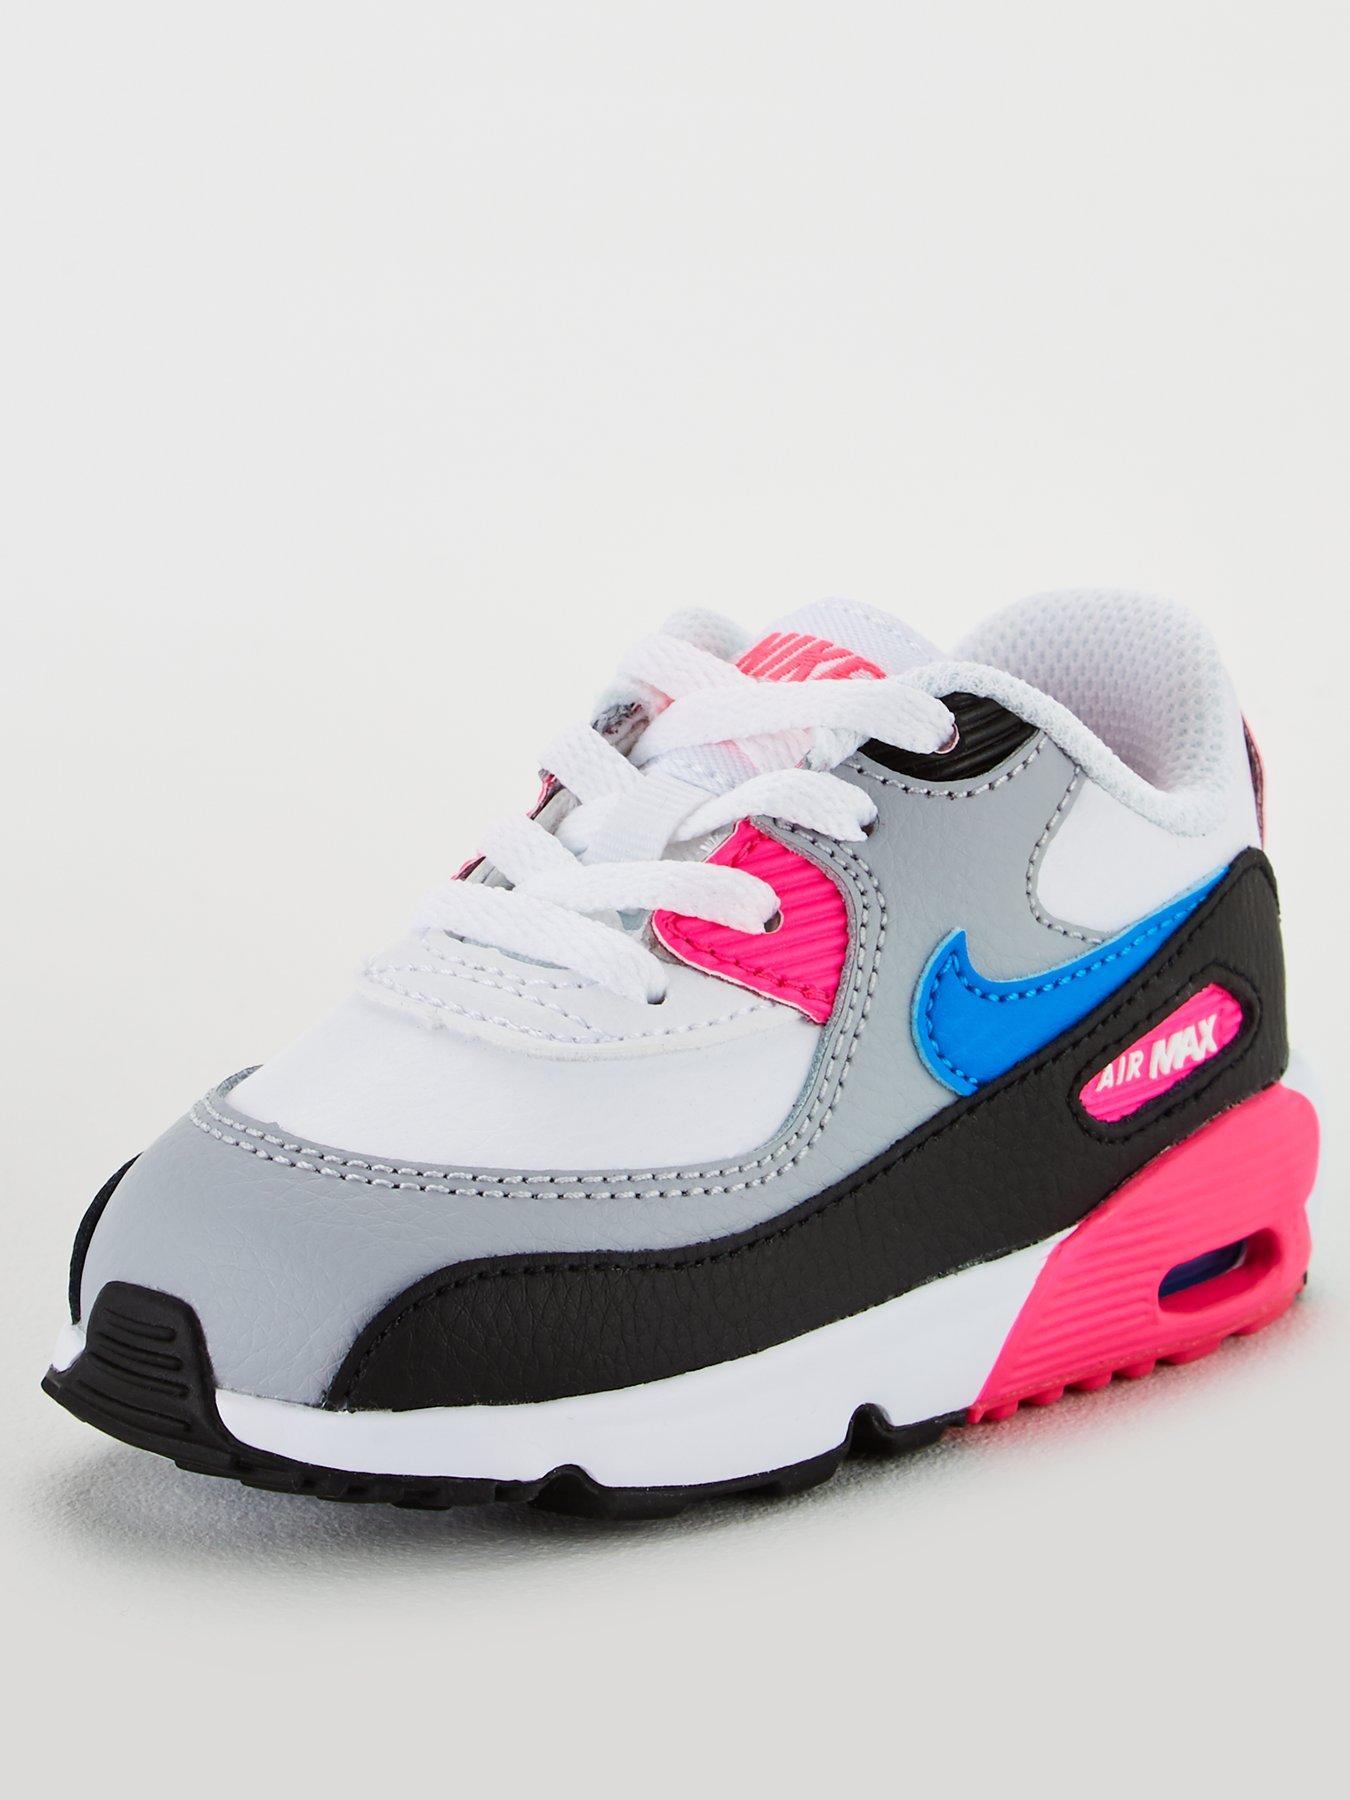 nike air max 90 baby pink trainers